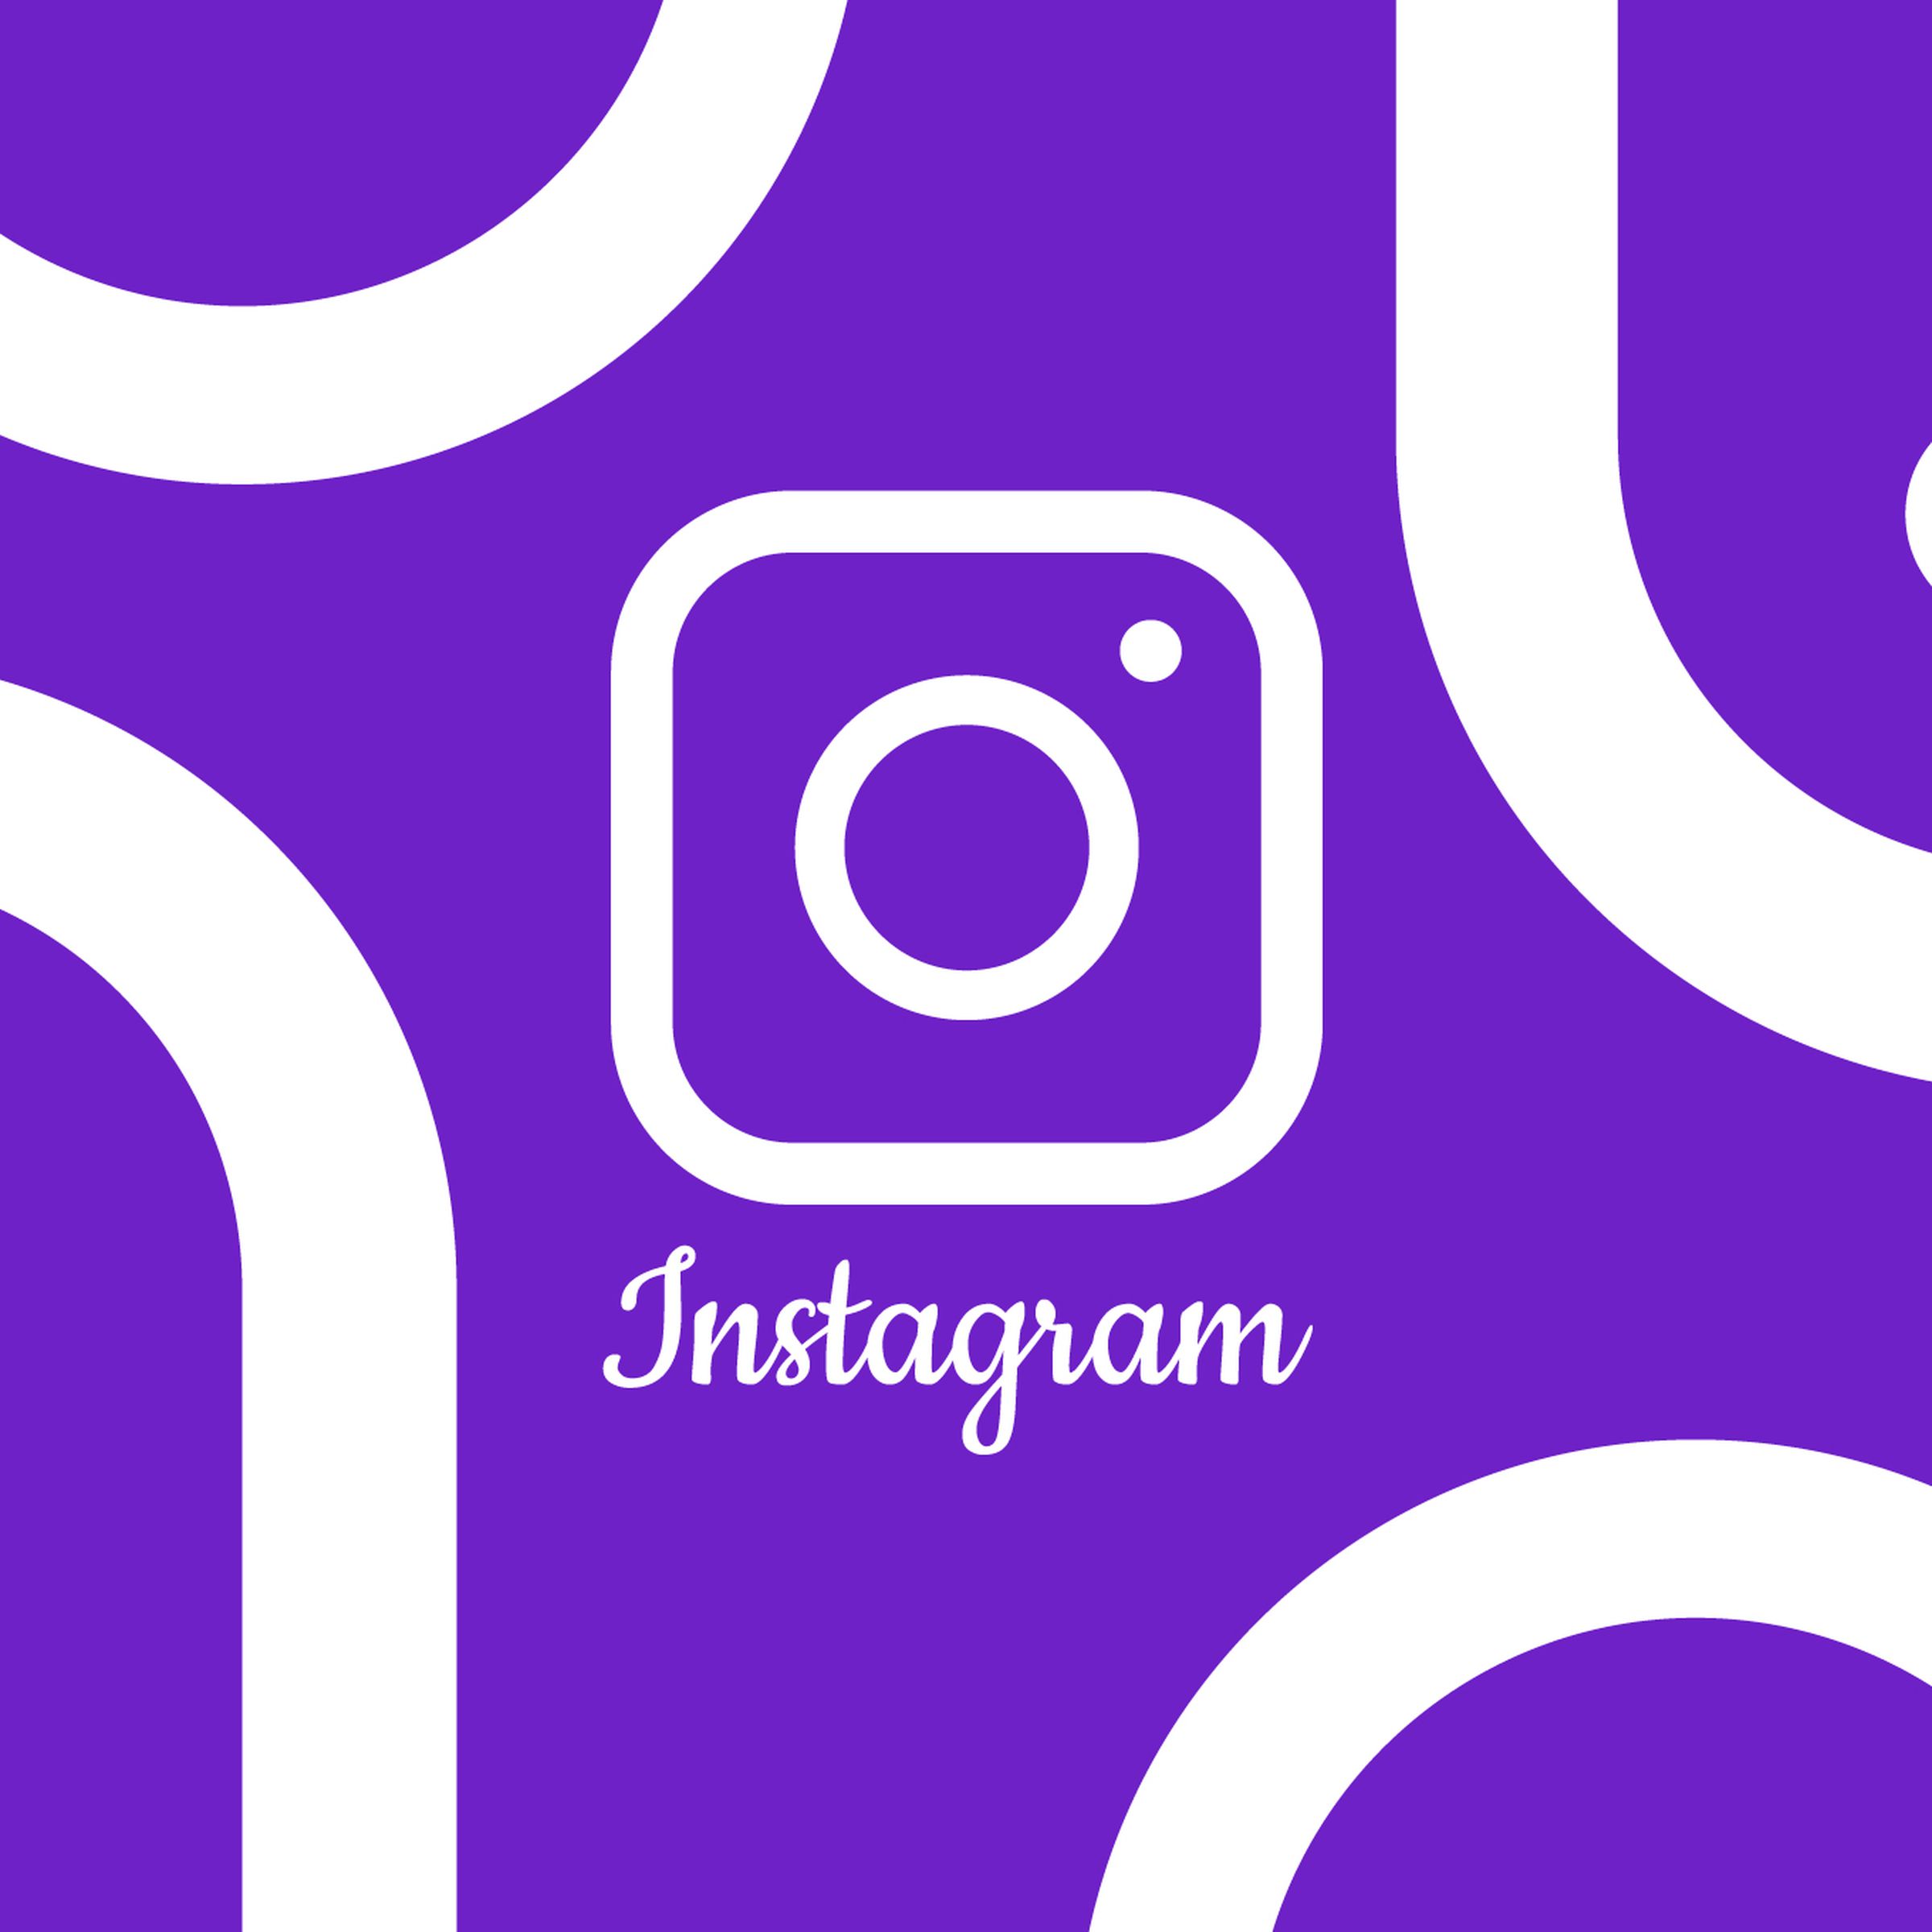 An image showing Instagram’s logo on a purple background